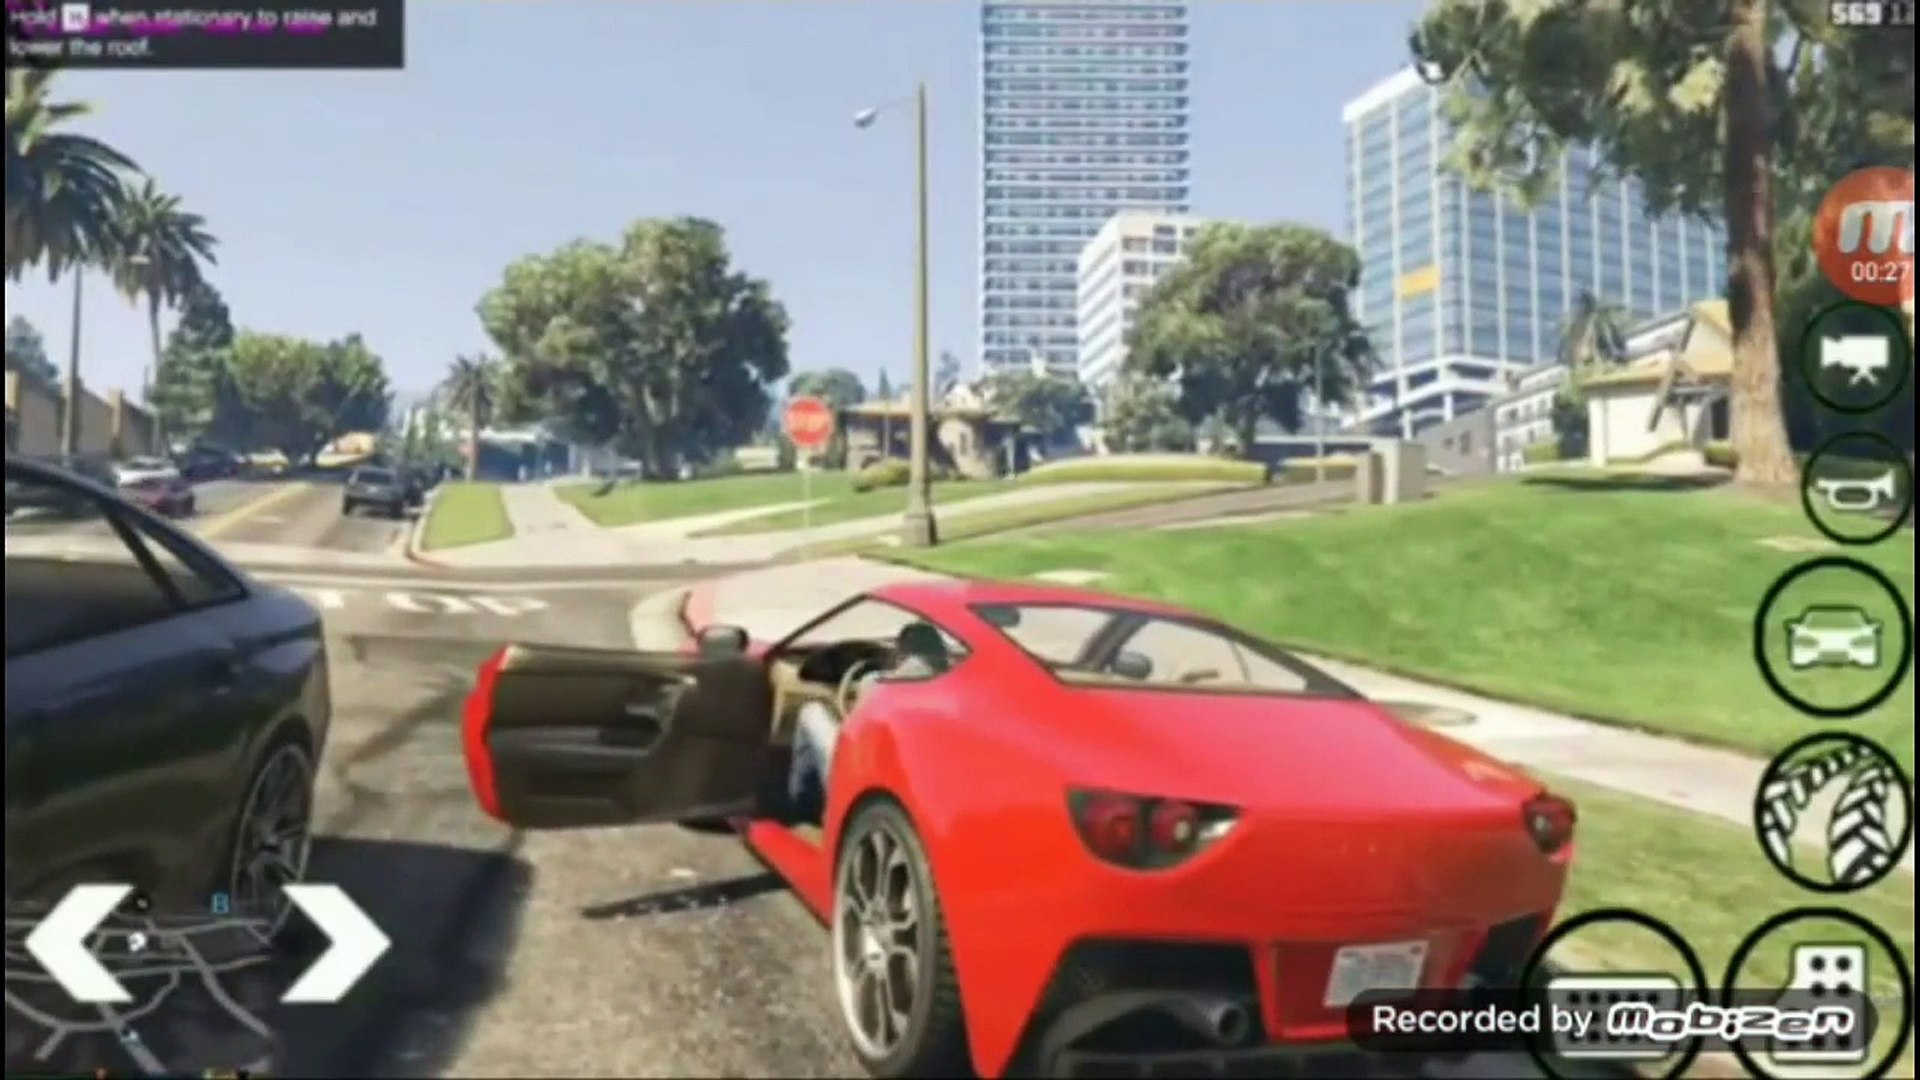 How to skip the human verification in GTA 5 after downloading its APK -  Quora